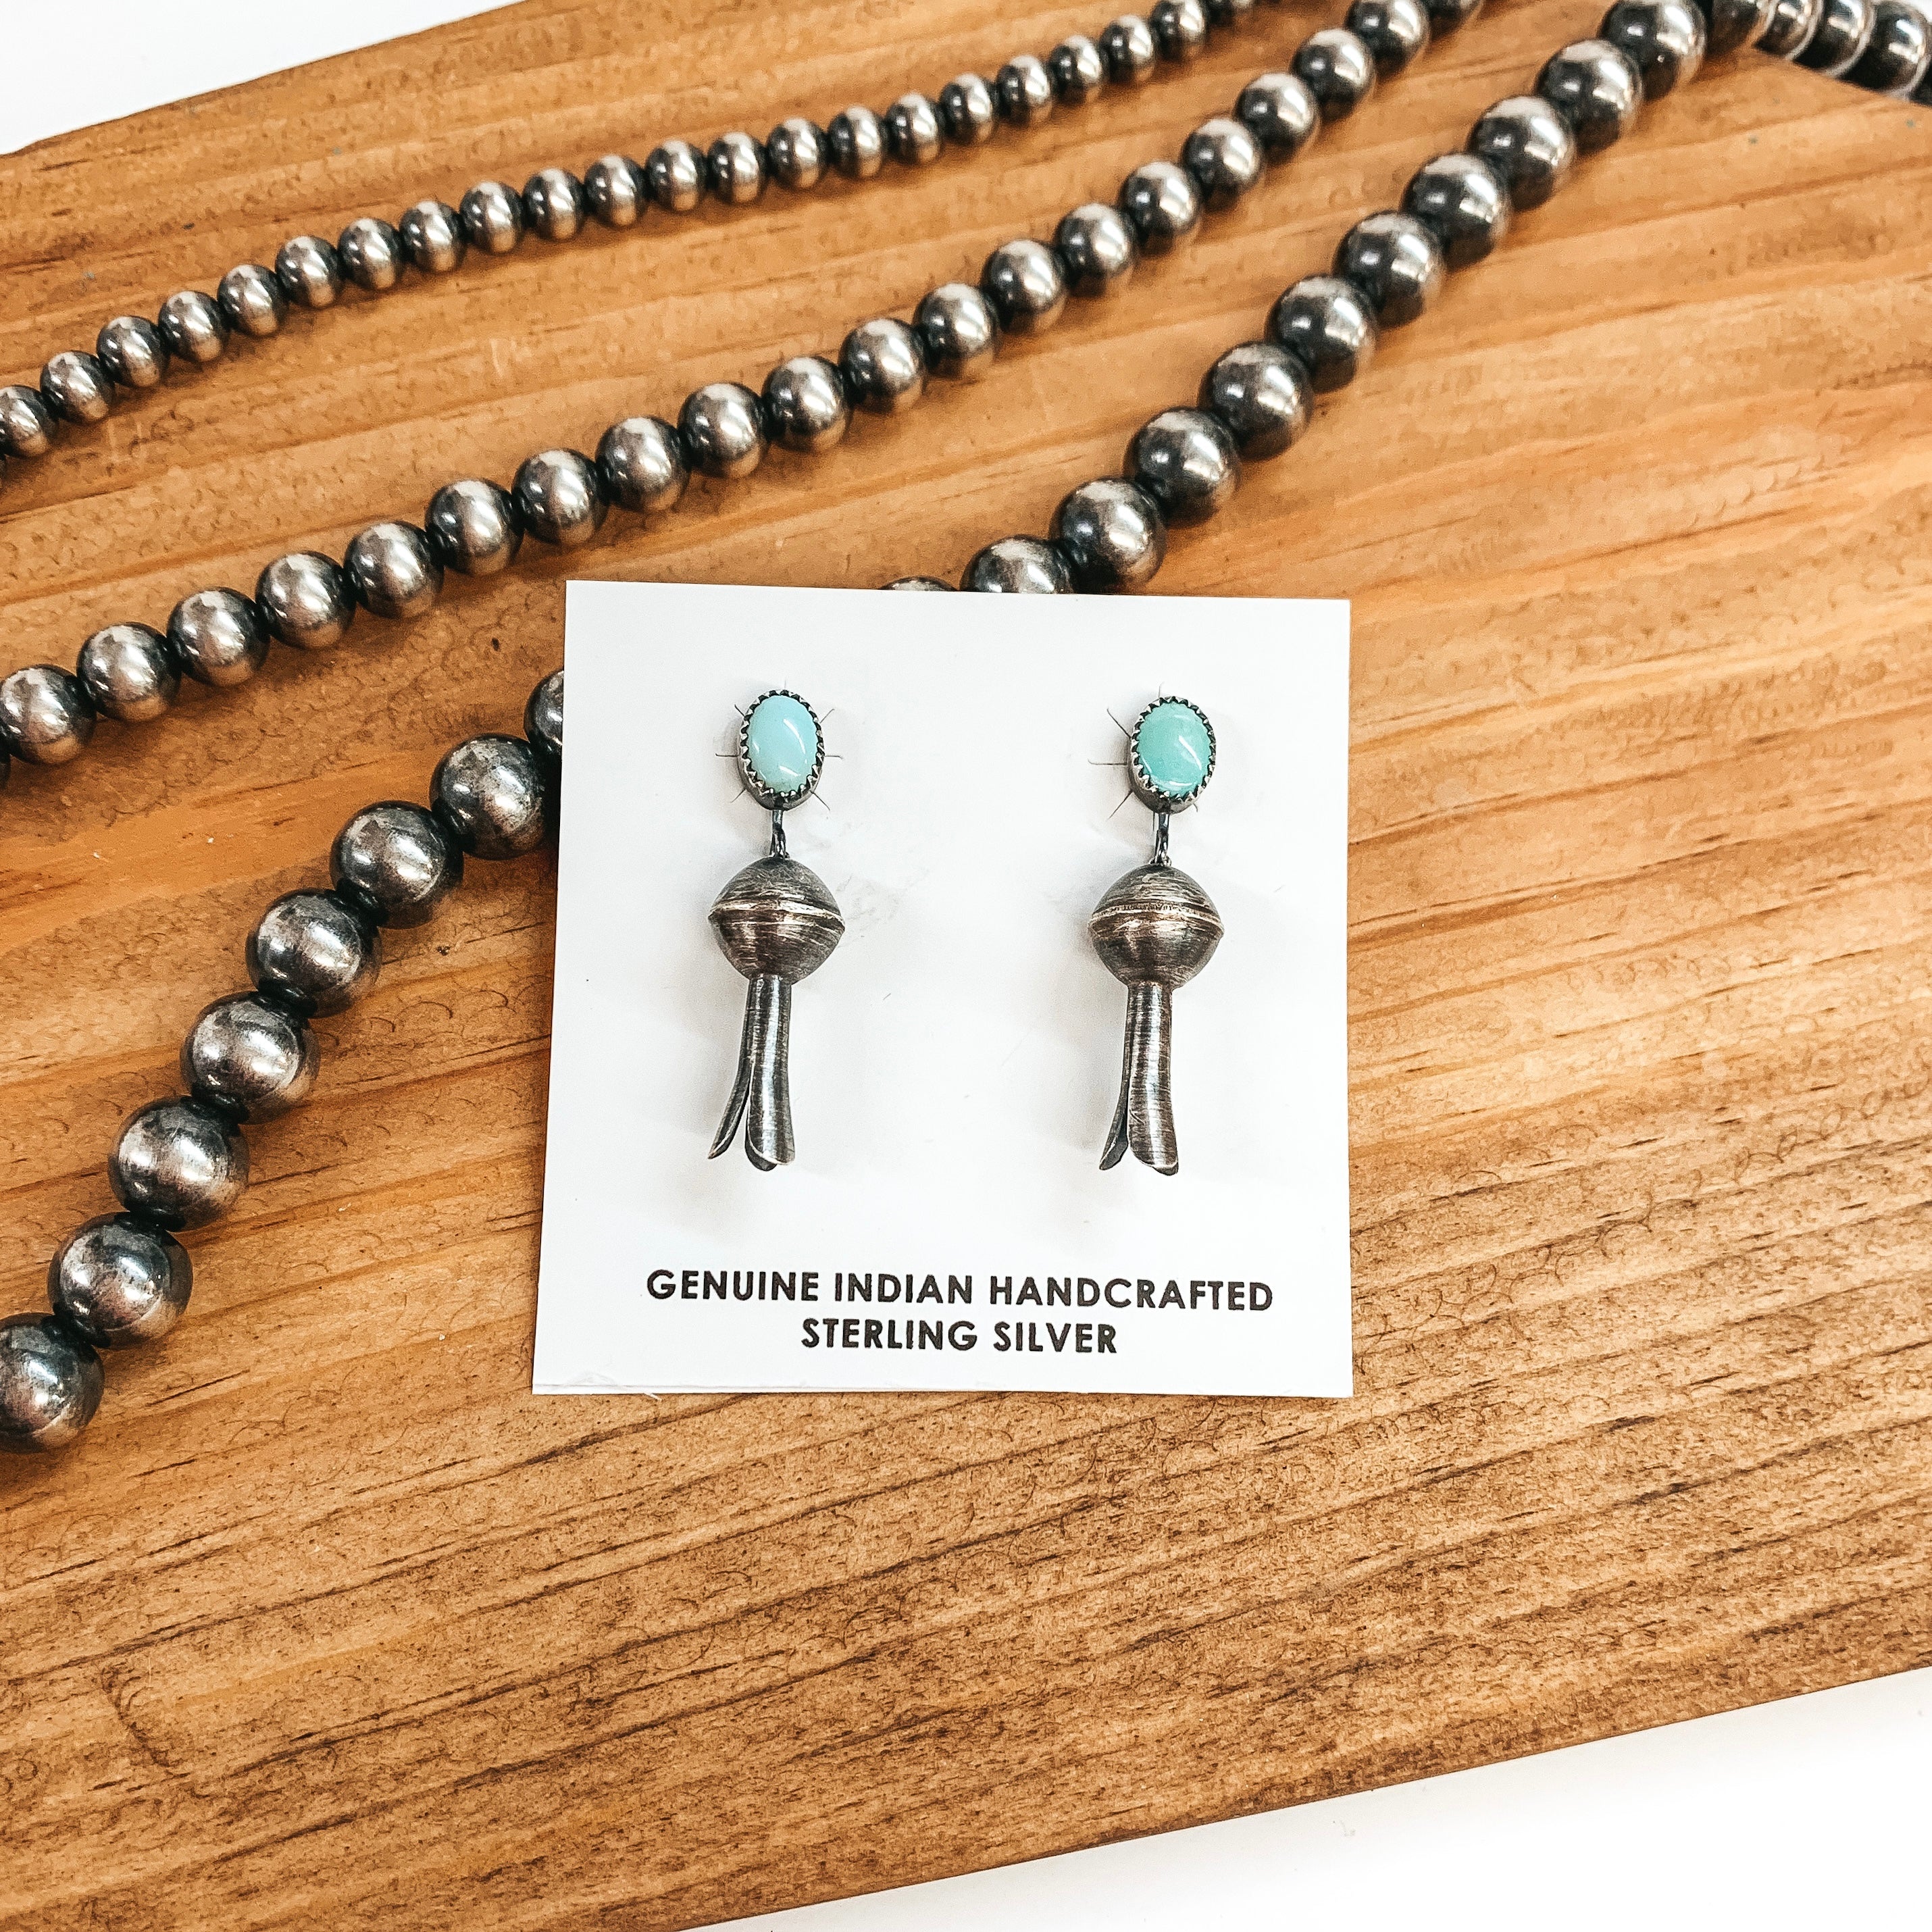 Navajo | Navajo Handmade Sterling Silver Squash Blossom Earrings with Turquoise Stone Posts